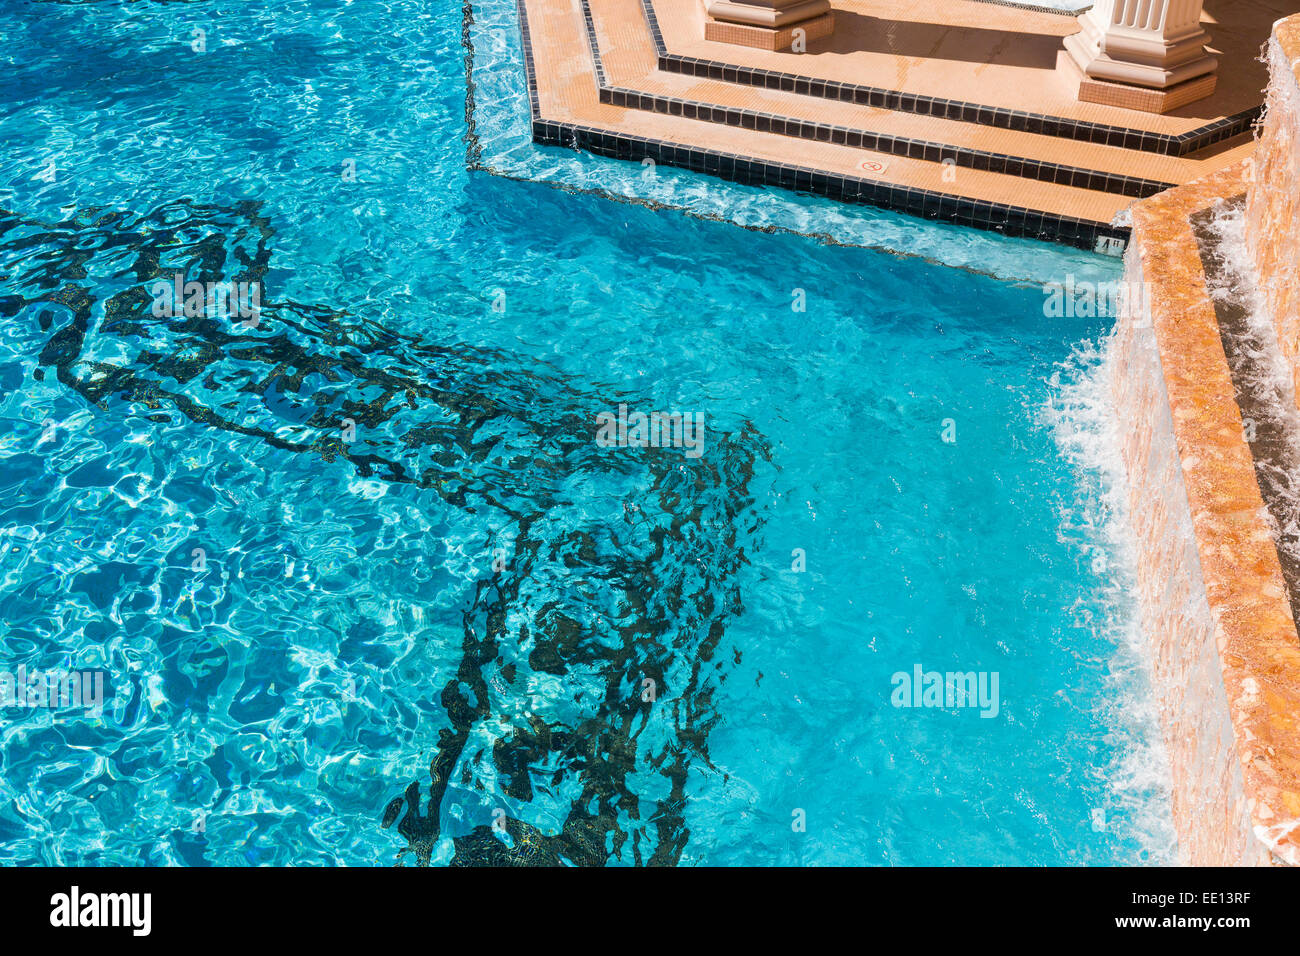 Exotic Luxury Swimming Pool Water and Architecture Abstract. Stock Photo